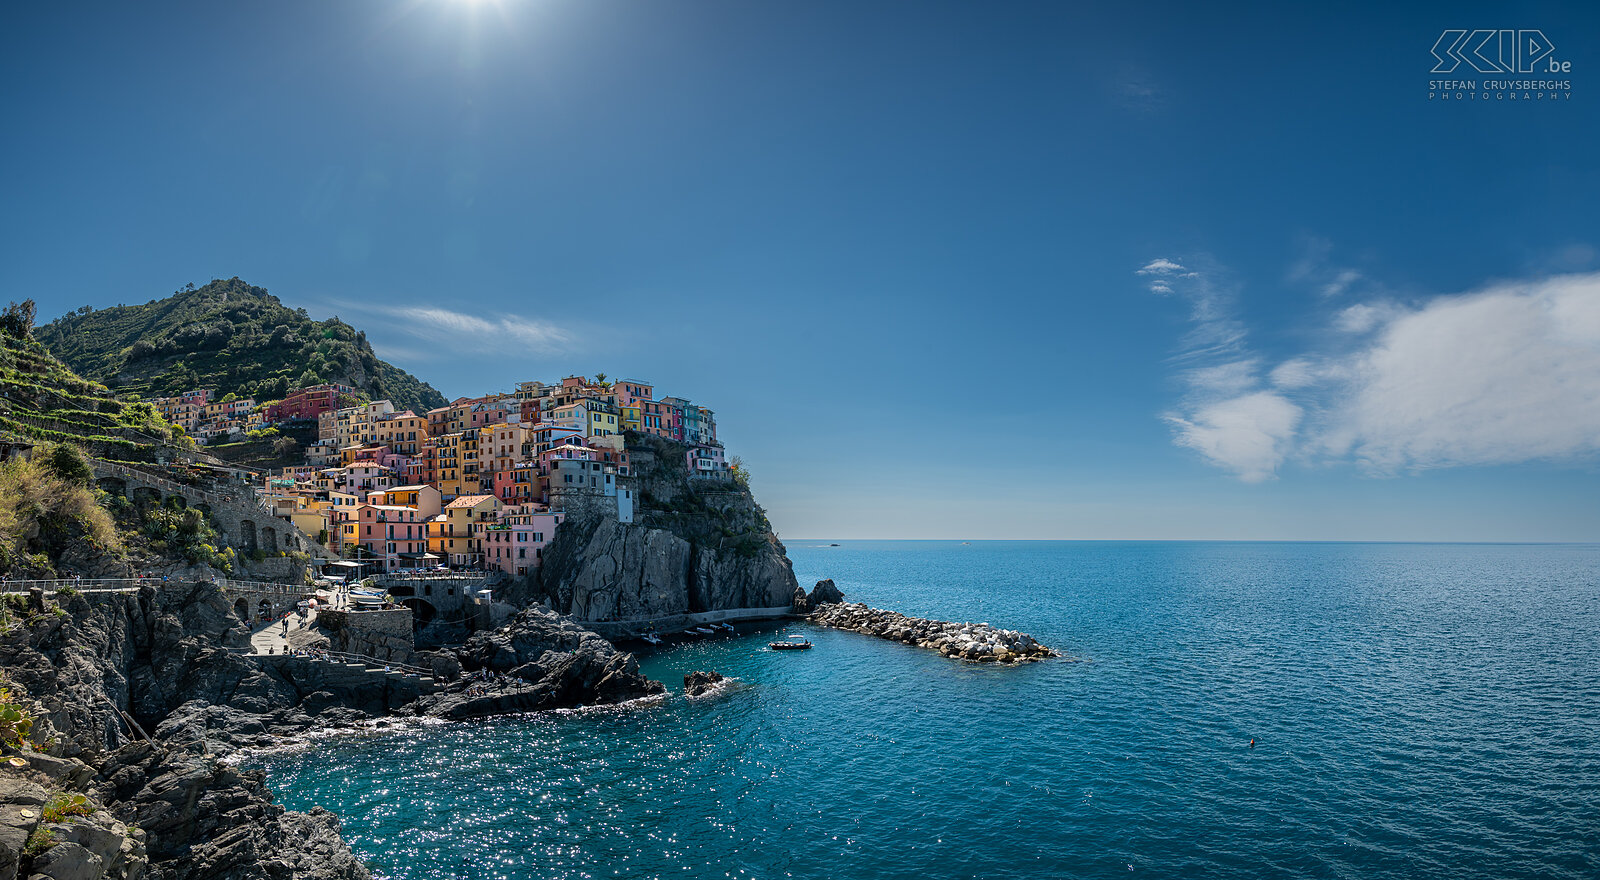 Manarola Manarola is built on a high rock 70 meters above sea level. This beautiful village of Cinque Terre has a small harbor with a boat ramp, narrow streets with picturesque multi-colored houses overlooking the sea and many fish restaurants. Stefan Cruysberghs